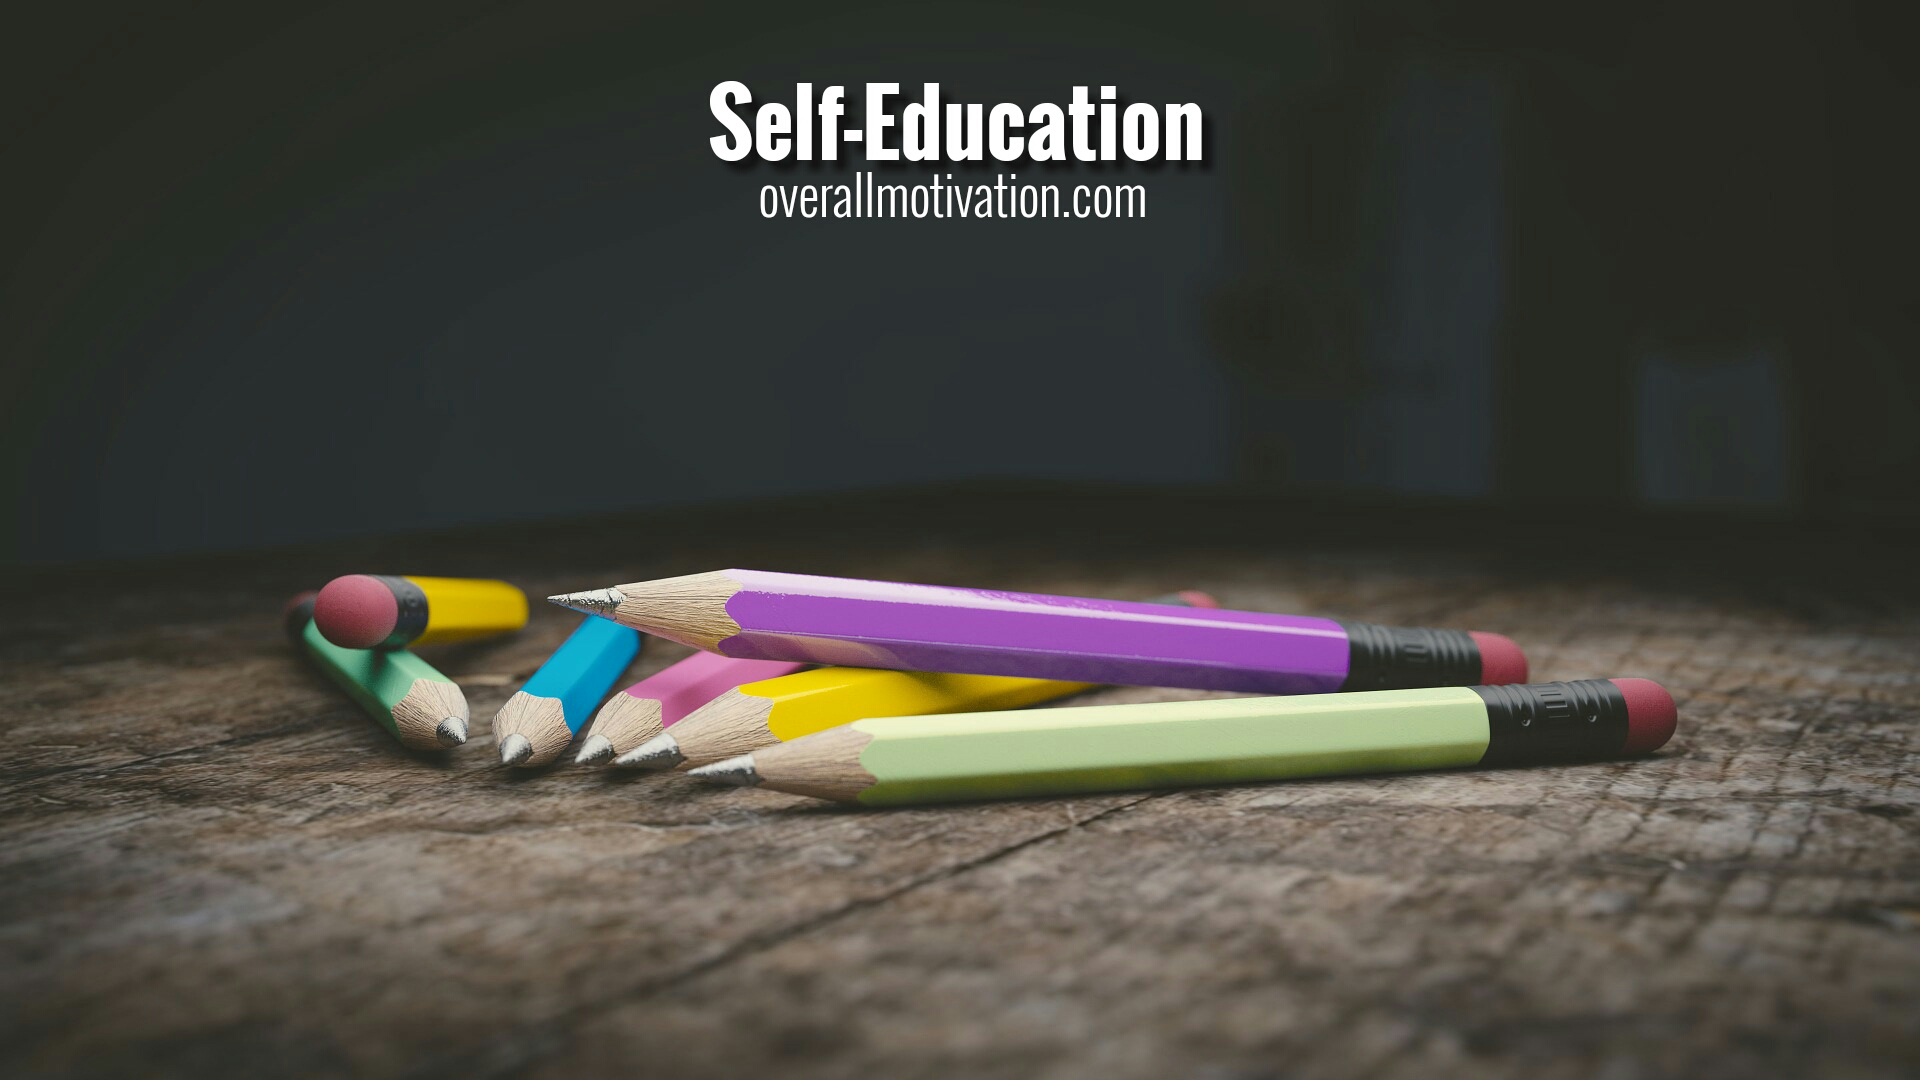 Self Education Quotes: Quotes On Self Study | OverallMotivation